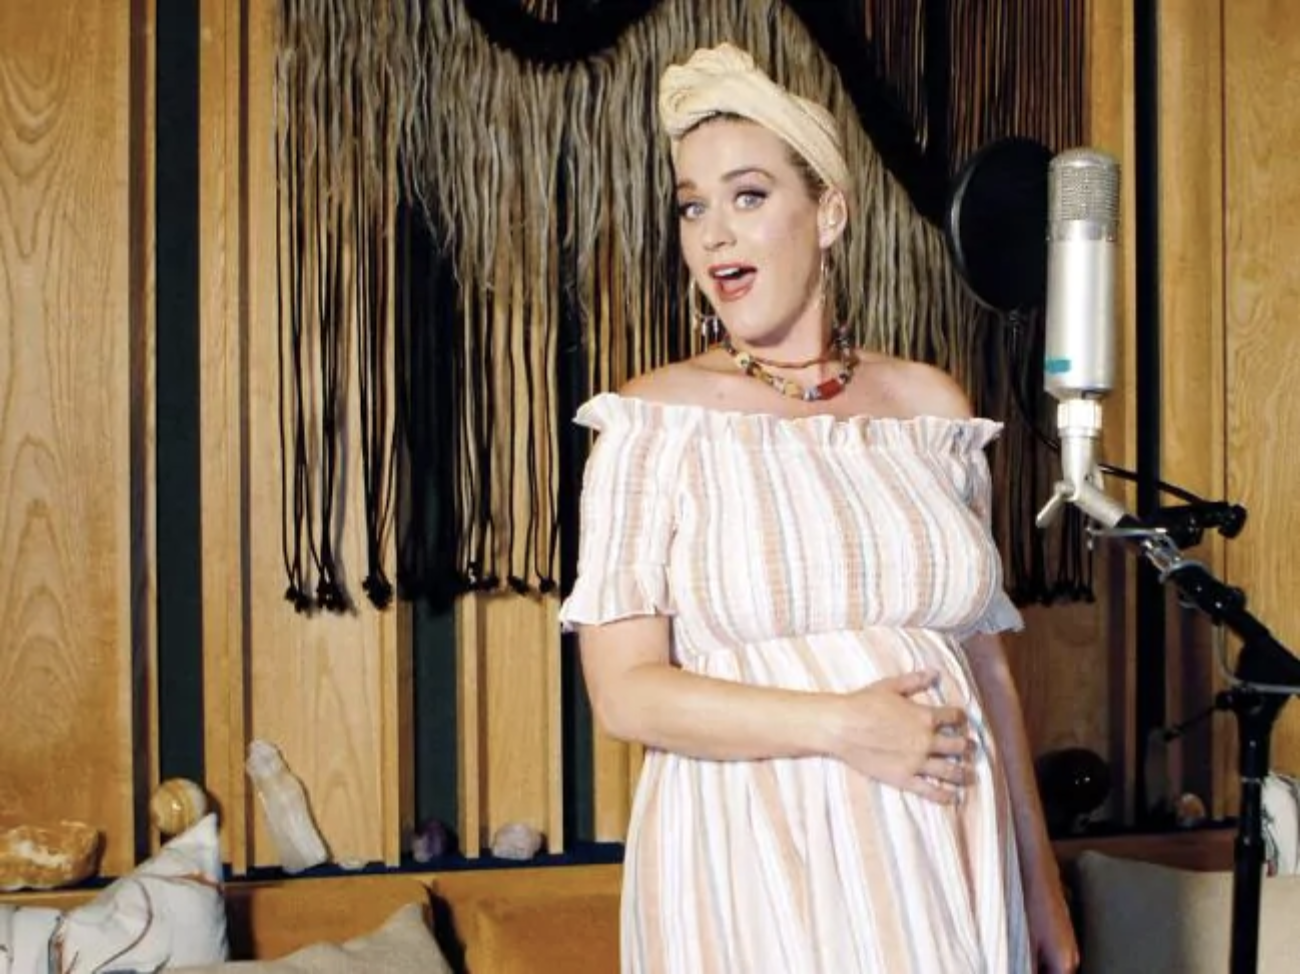  Katy and bump. Picture: Getty Images/Getty Images for SHEINSource:Getty Images